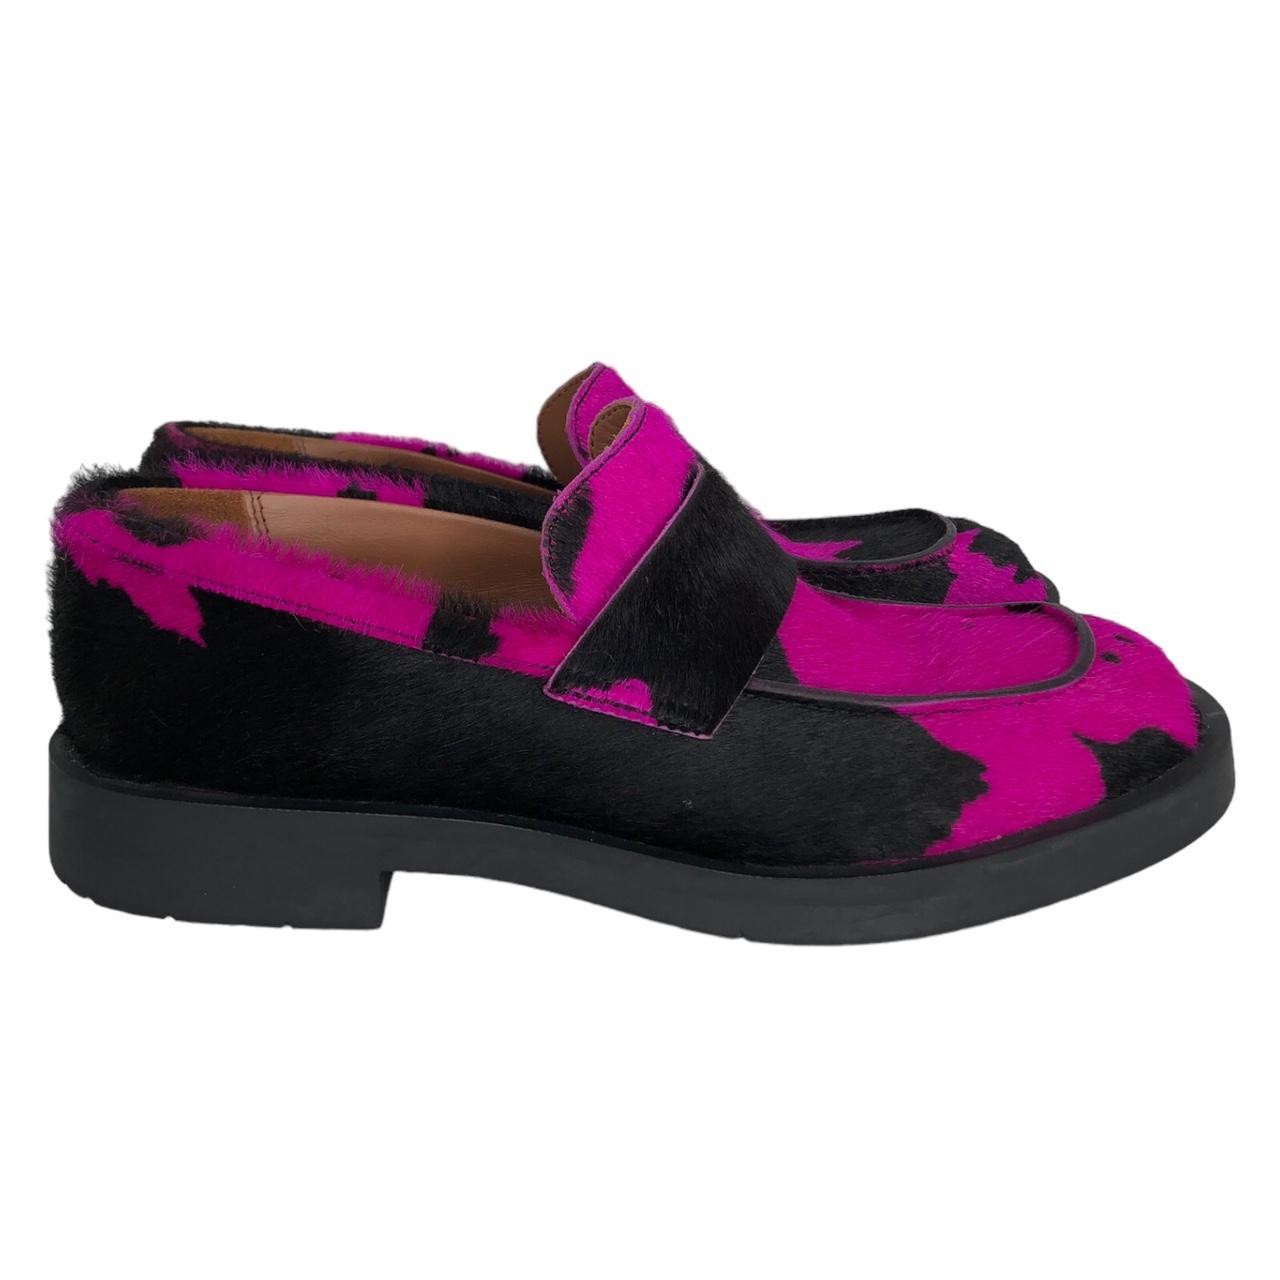 CamperLab Women's Pink and Black Loafers (3)